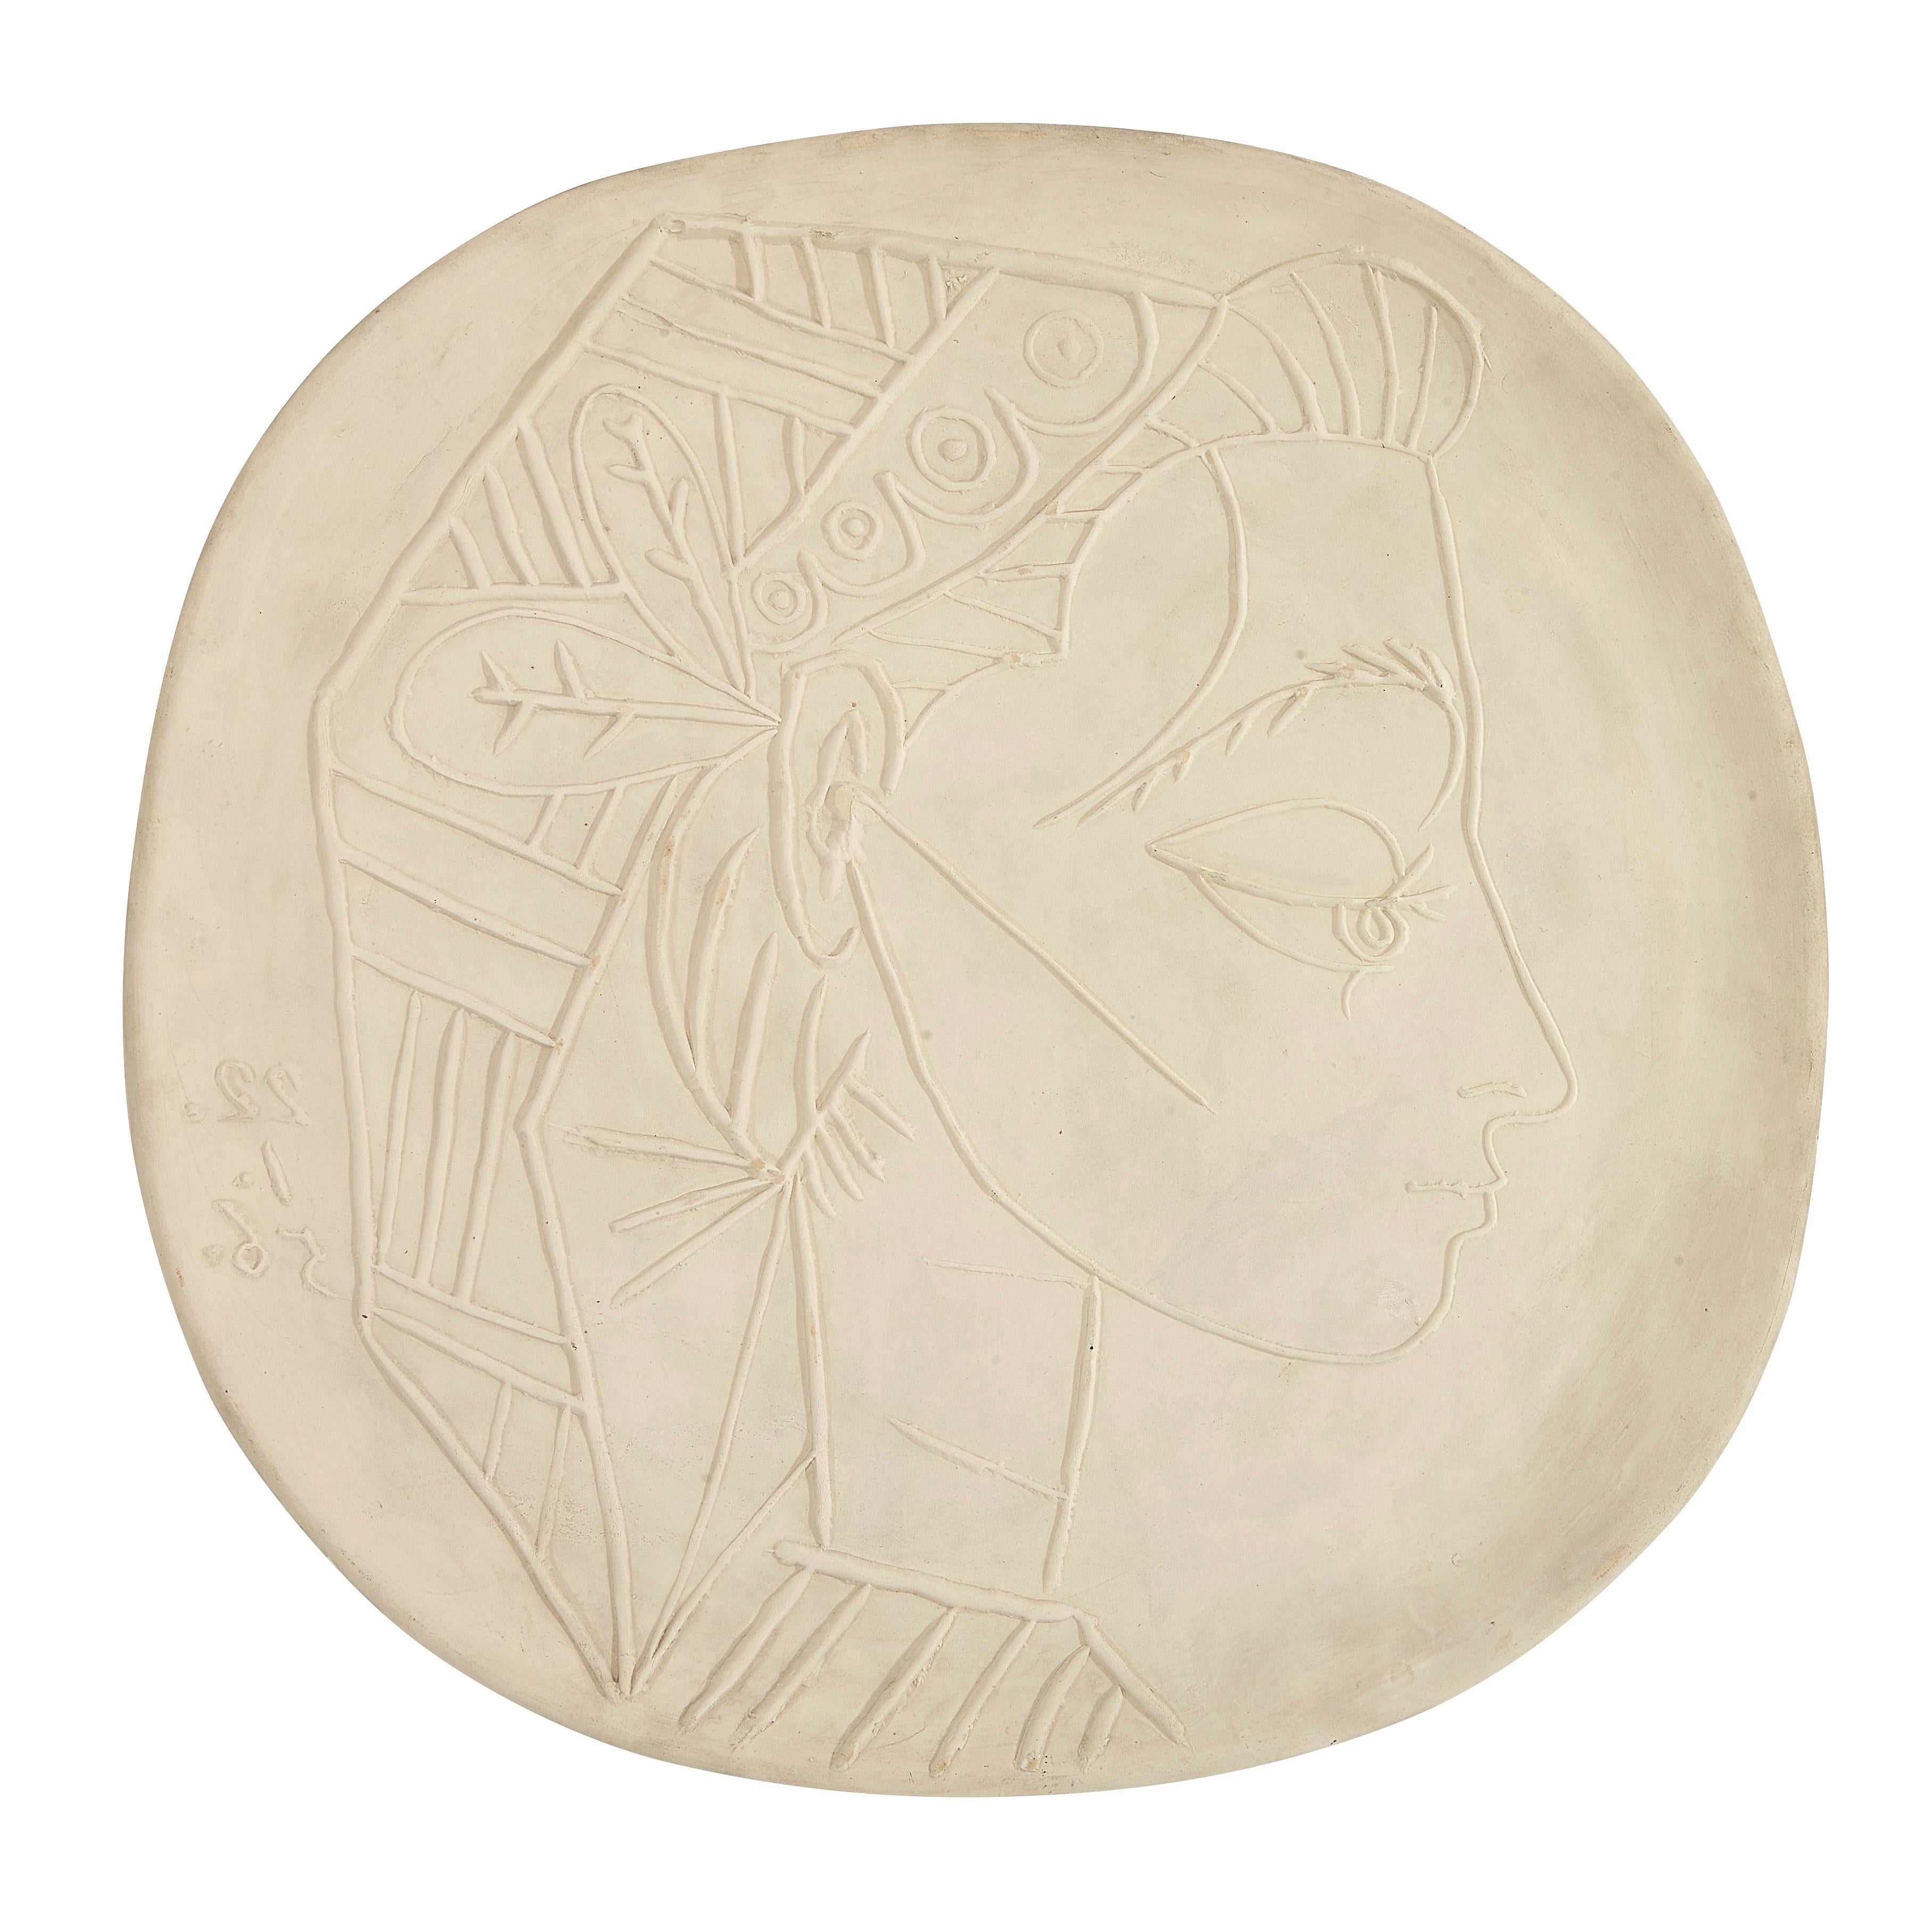 PABLO PICASSO (1881-1973) 
Profil de Jacqueline (A. R. 309) 

Terre de faïence dish, 1956, from the edition of 100, with the workshop numbering, with the Edition Picasso, Empreinte Originale de Picasso and Madoura stamps.